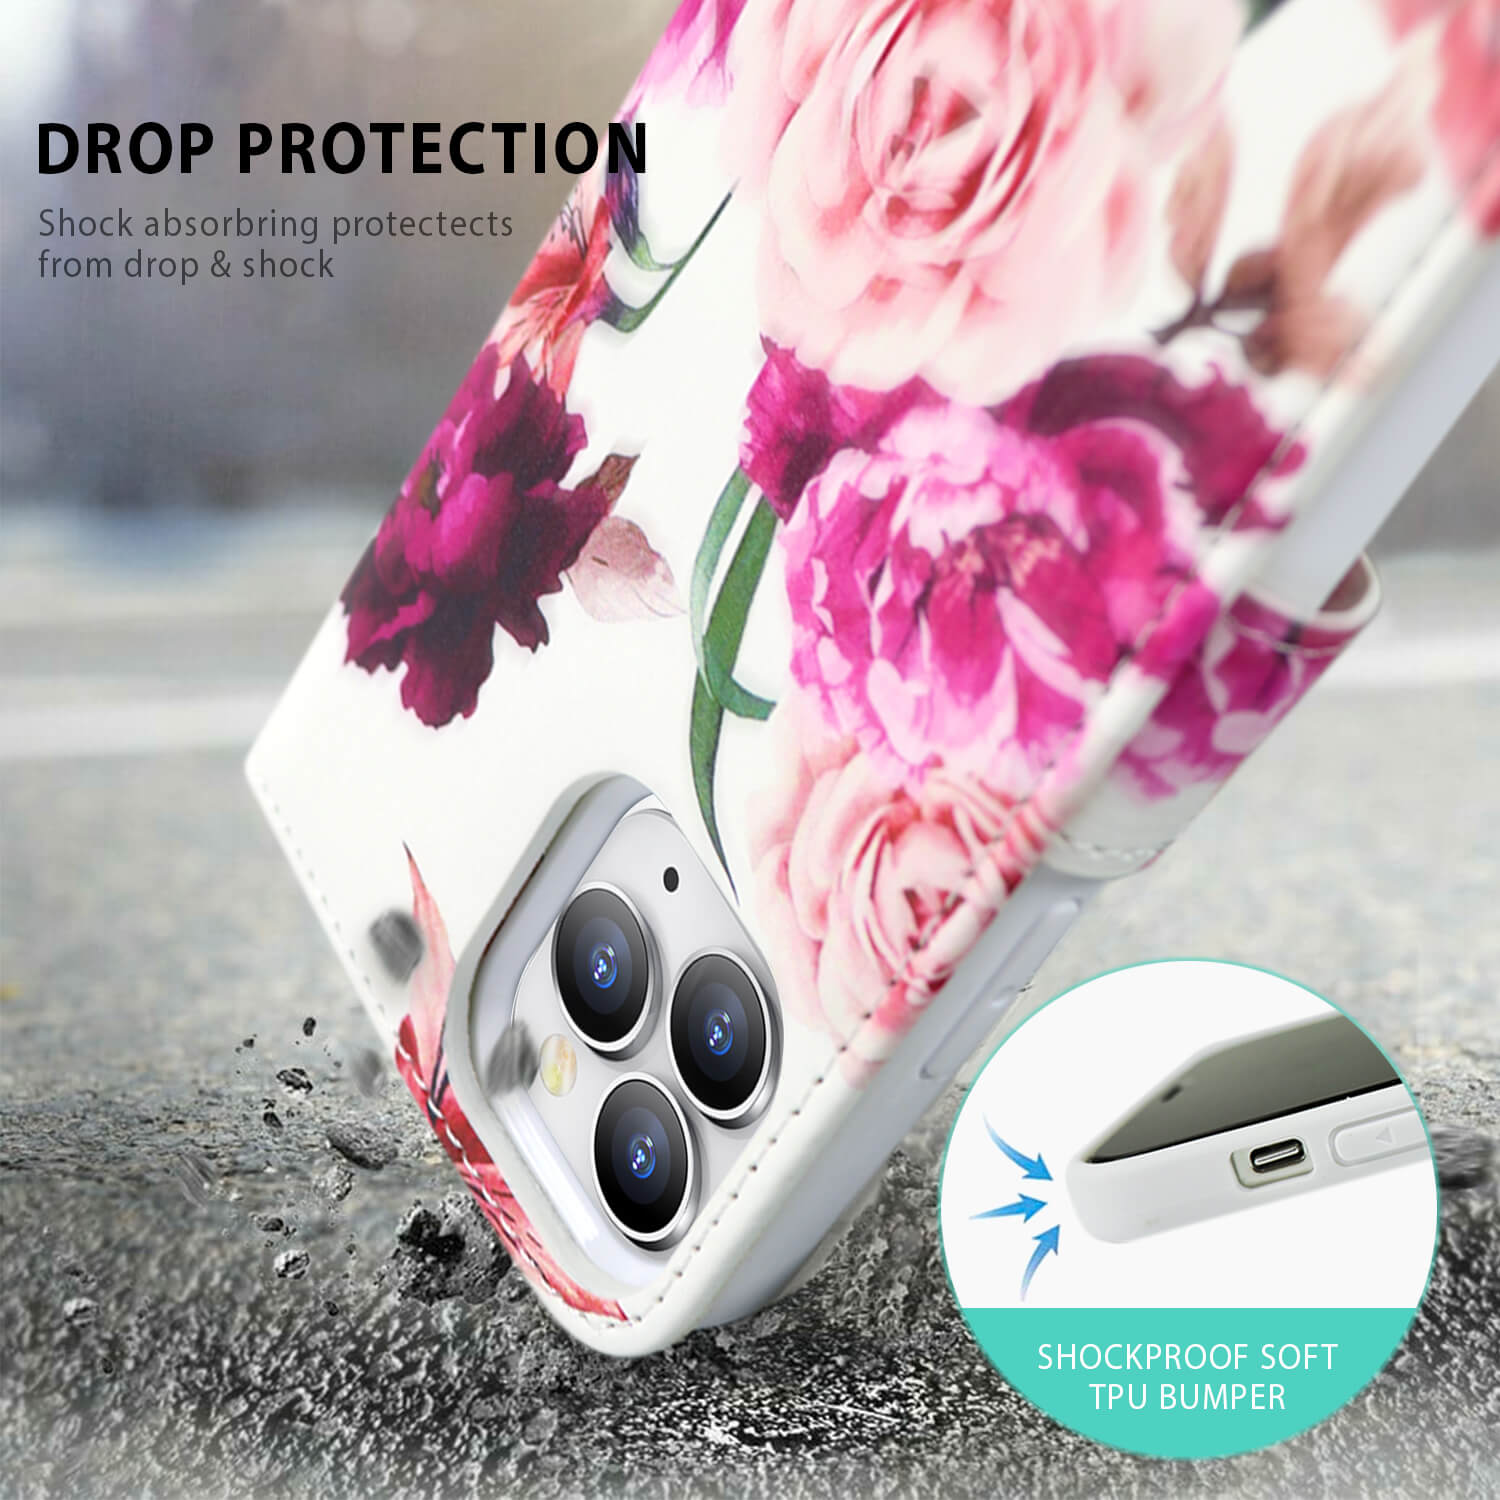 Tough On iPhone 13 Pro Max Case Magnetic Detachable Leather Rose Flower